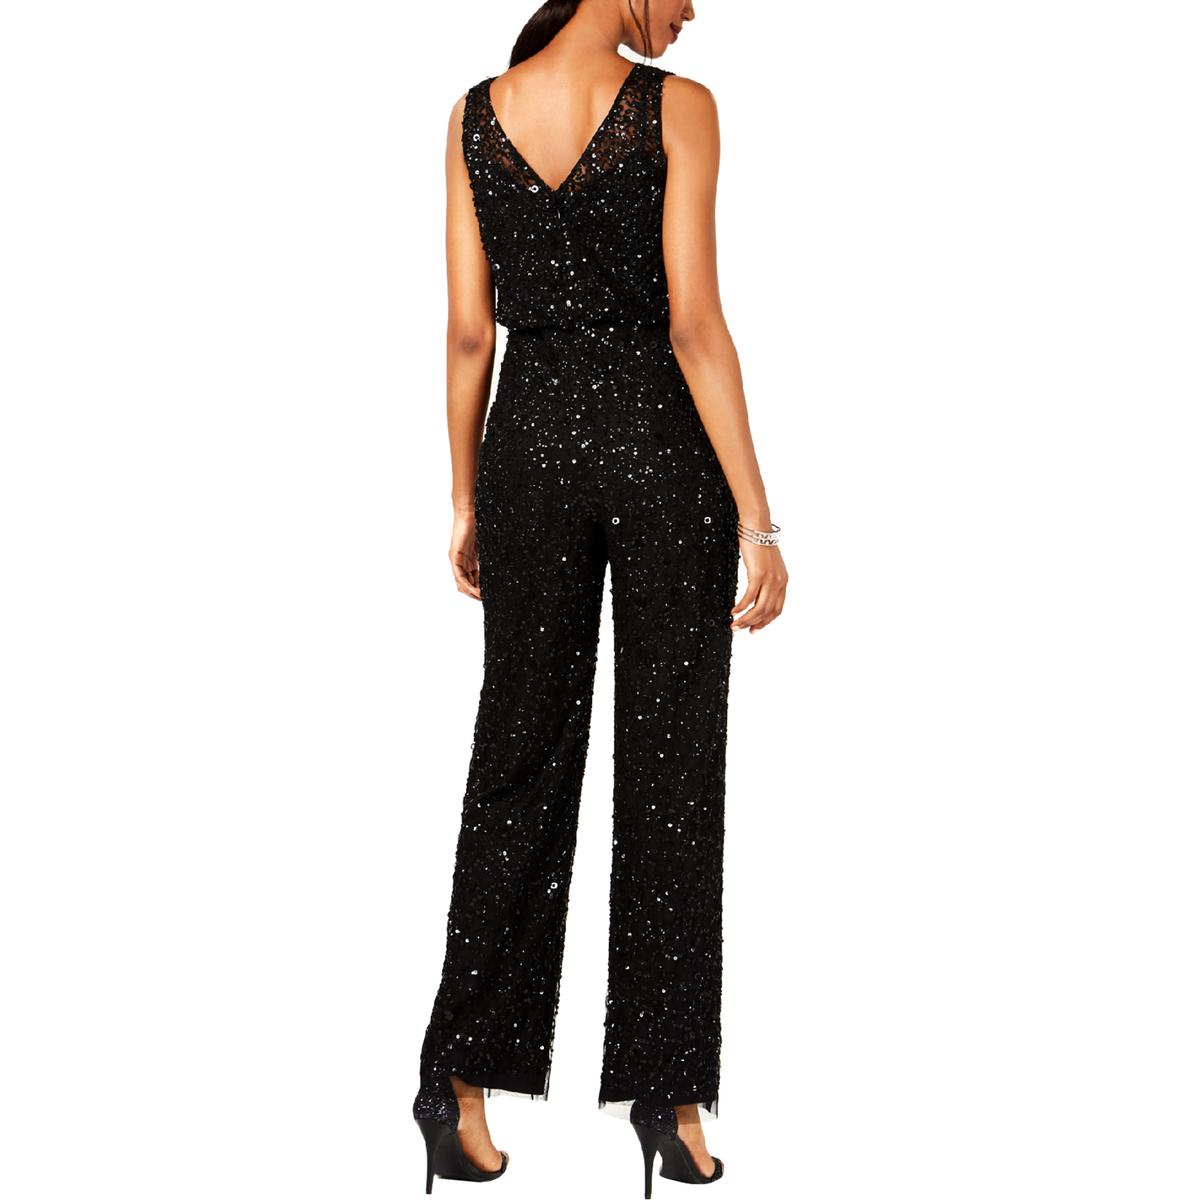 Adrianna Papell Womens Black Sequined Blouson Dressy Jumpsuit 2 BHFO ...